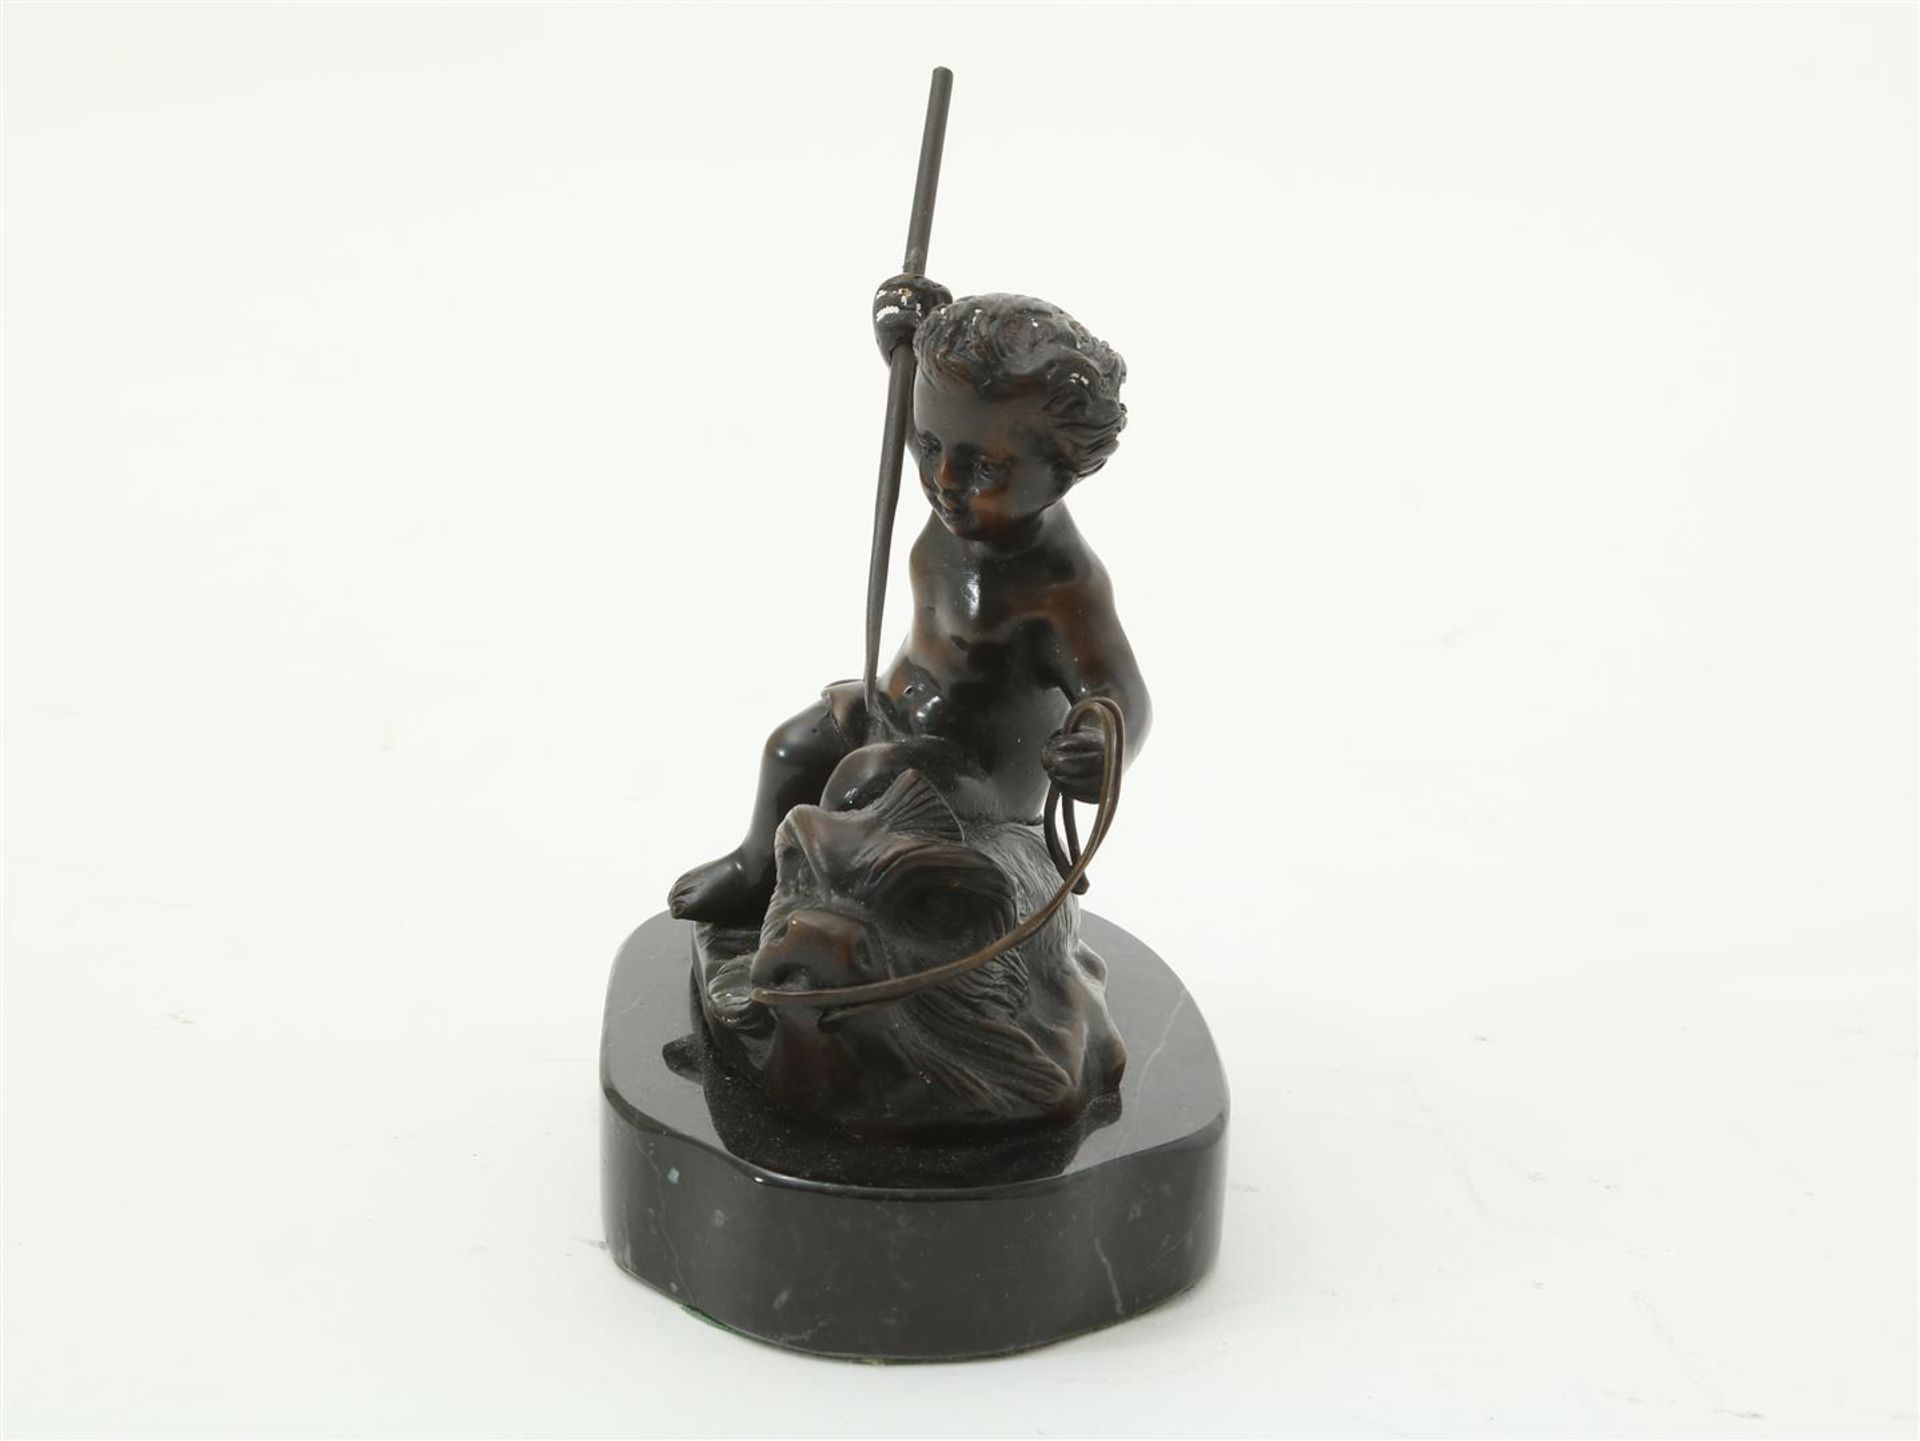 Bronze sculpture of Poseidon on sea monster and marble base, 14 x 10 x 8 cm. - Image 2 of 3